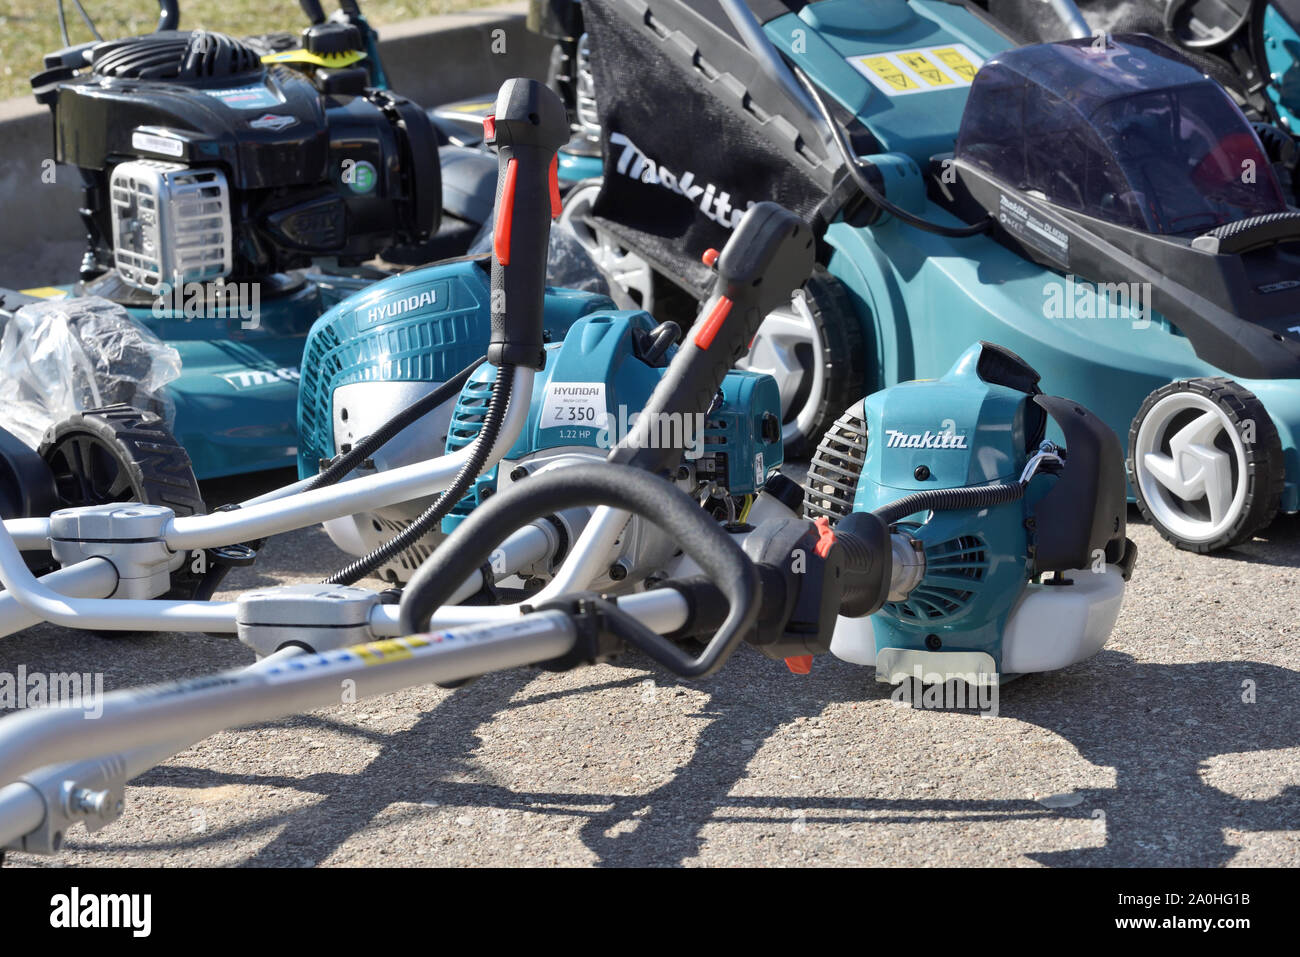 Kaunas, Lithuania - April 04: Makita String Trimmers and logo in Kaunas on April 04, 2019. Makita Corporation founded on March 21, 1915 it is based in Stock Photo